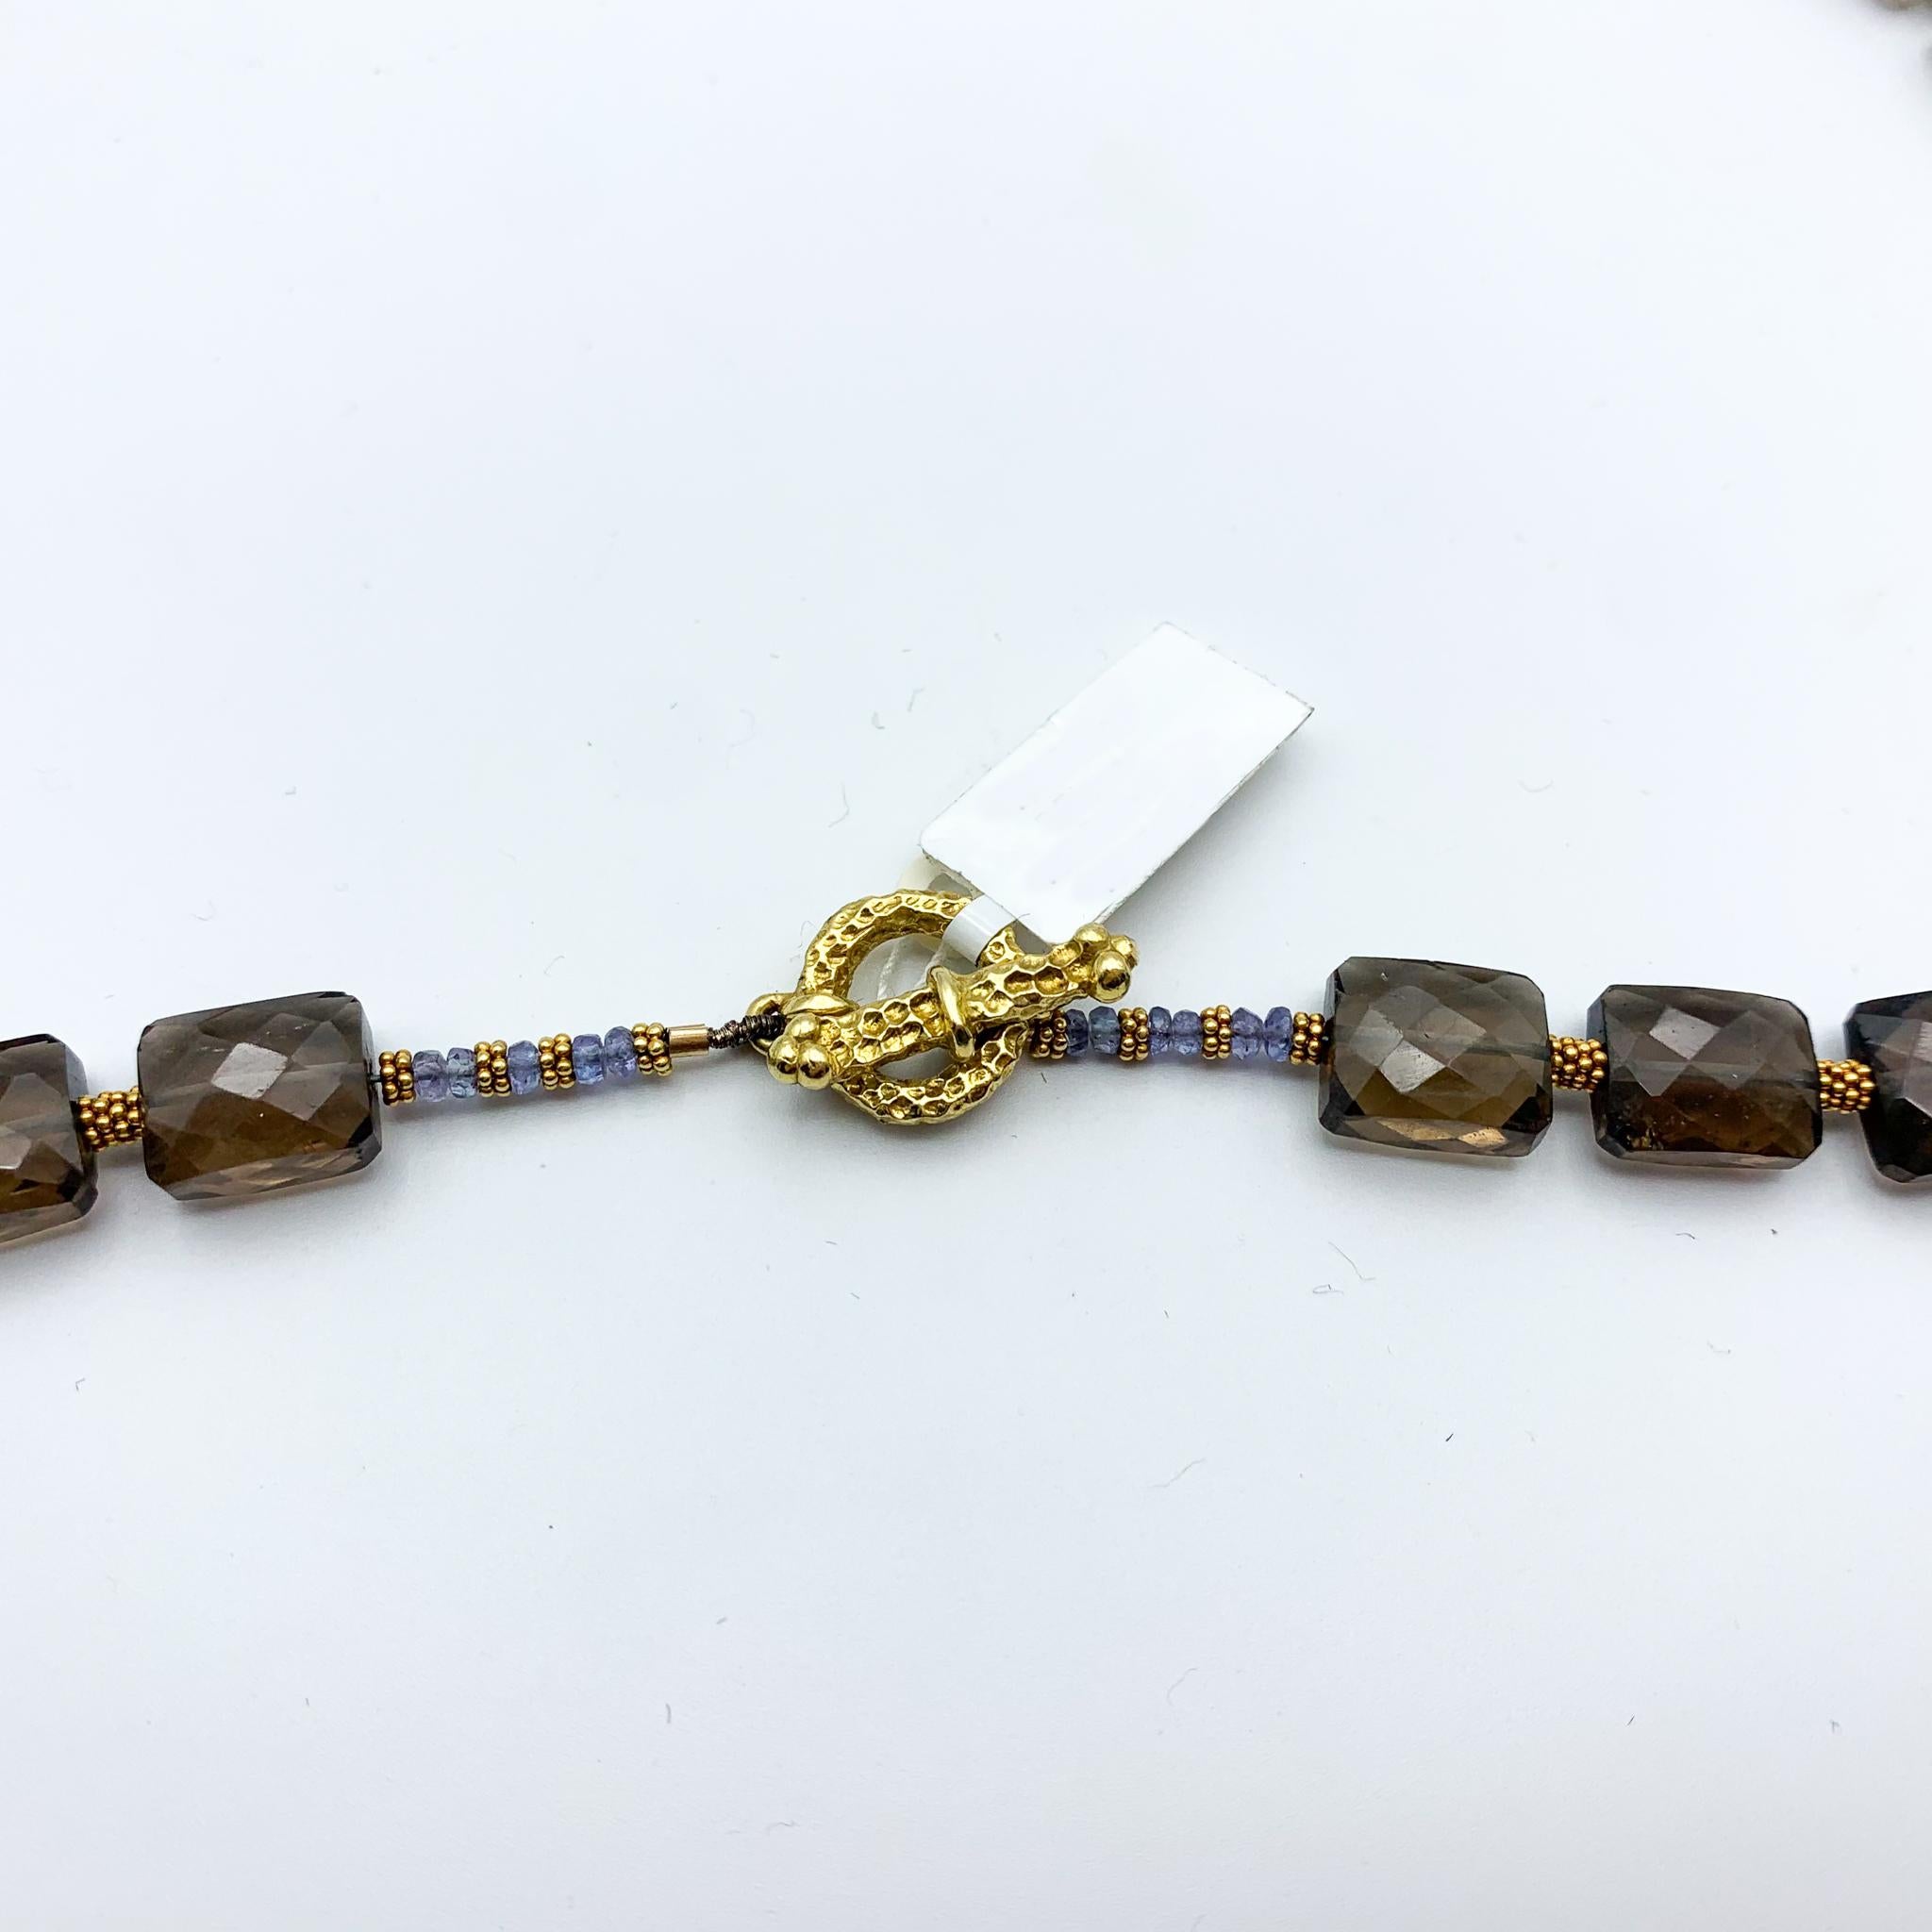 Fine crafted Smokey Quartz, Sapphires, and Gold beads 
Bar & Ring Clasp 
Approximately 21 inches in length/around. 